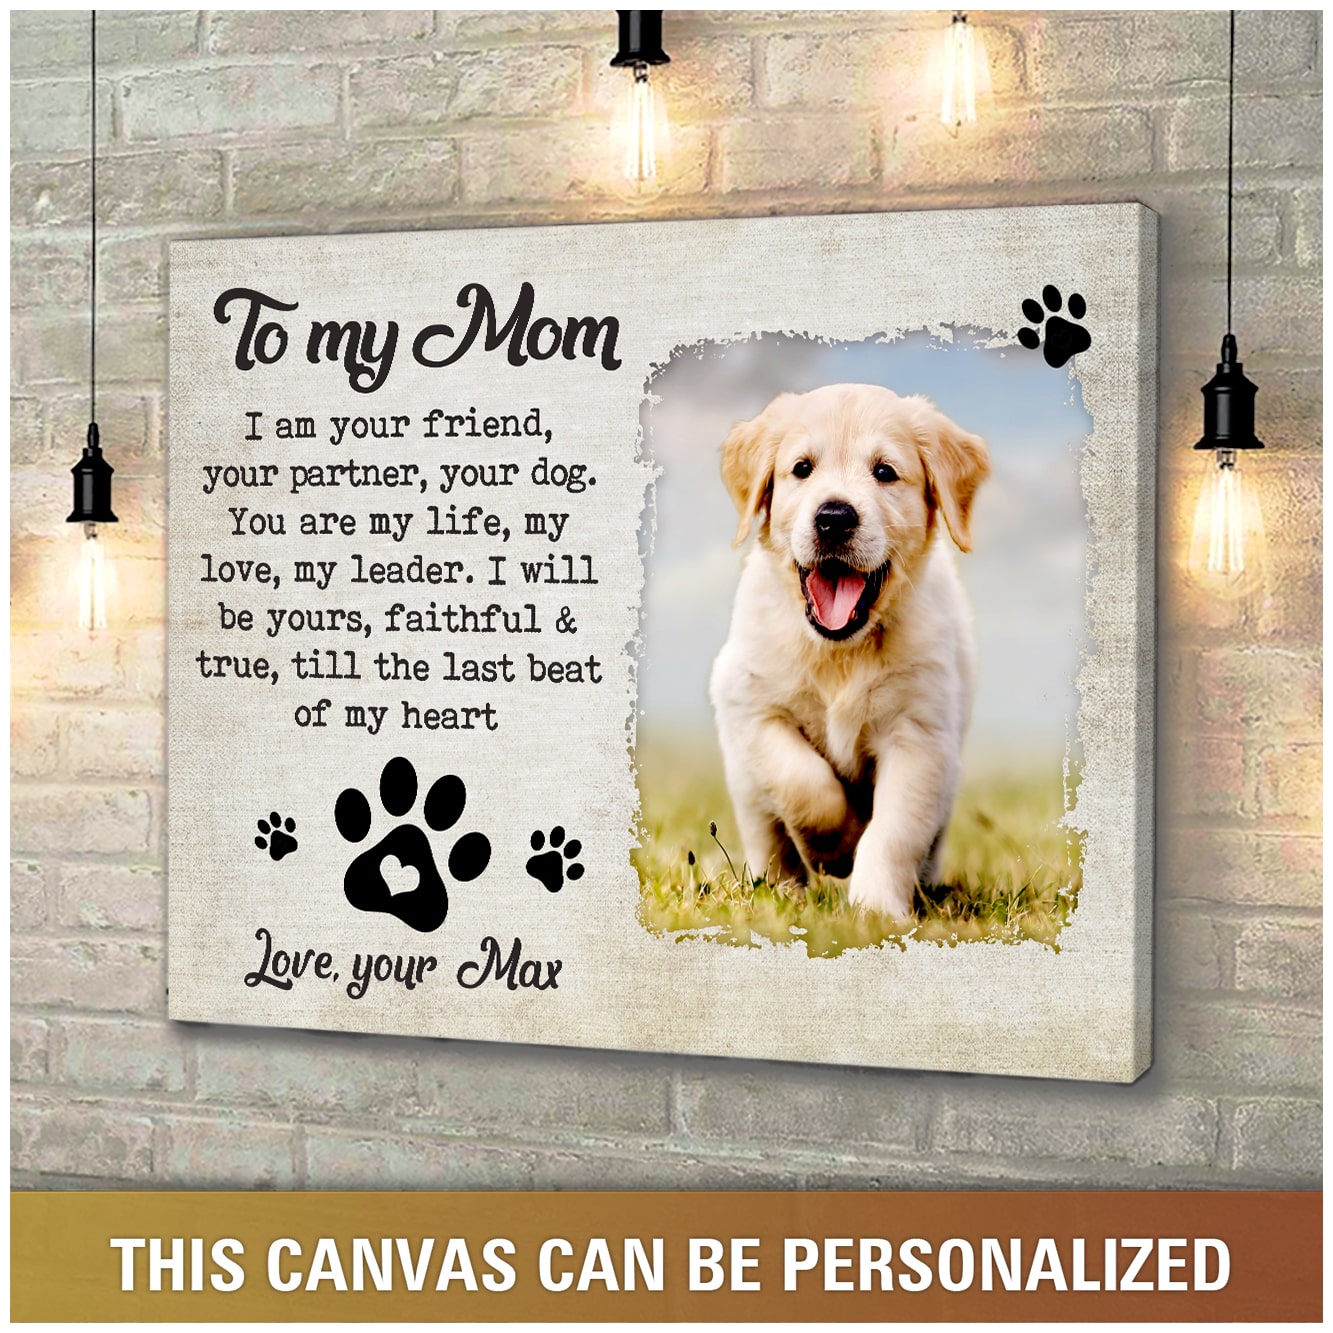 https://images.ohcanvas.com/ohcanvas_com/2022/03/10025208/happy-mothers-day-dog-mom-personalized-gift-for-dog-mom-i-am-your-friend-your-partner02.jpg